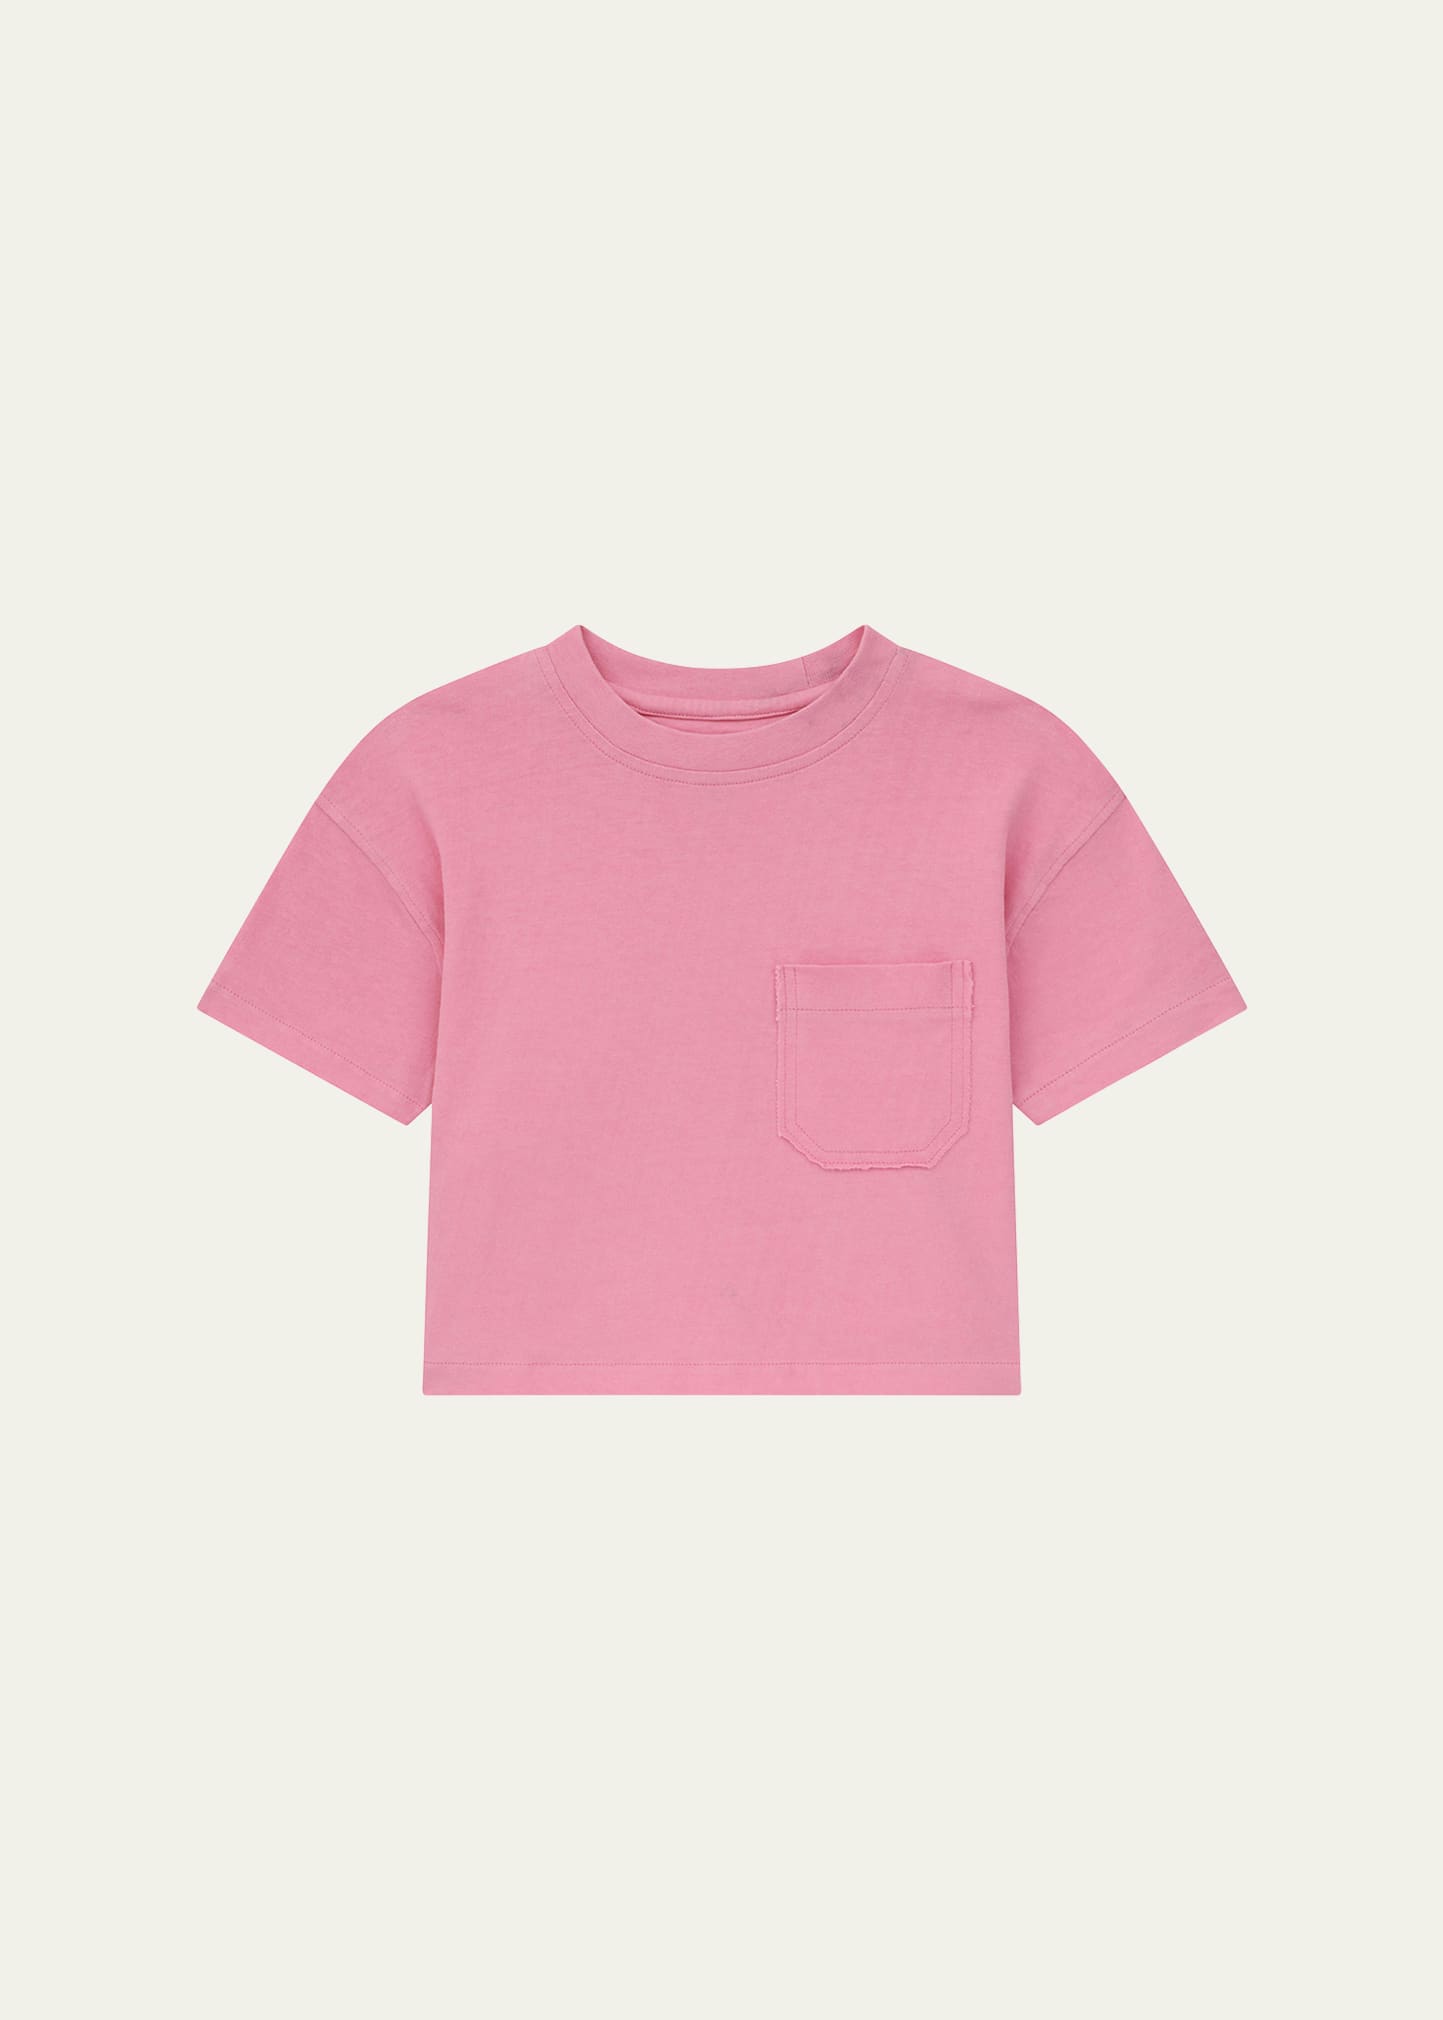 Girl's Solid T-Shirt, Size 2-6X